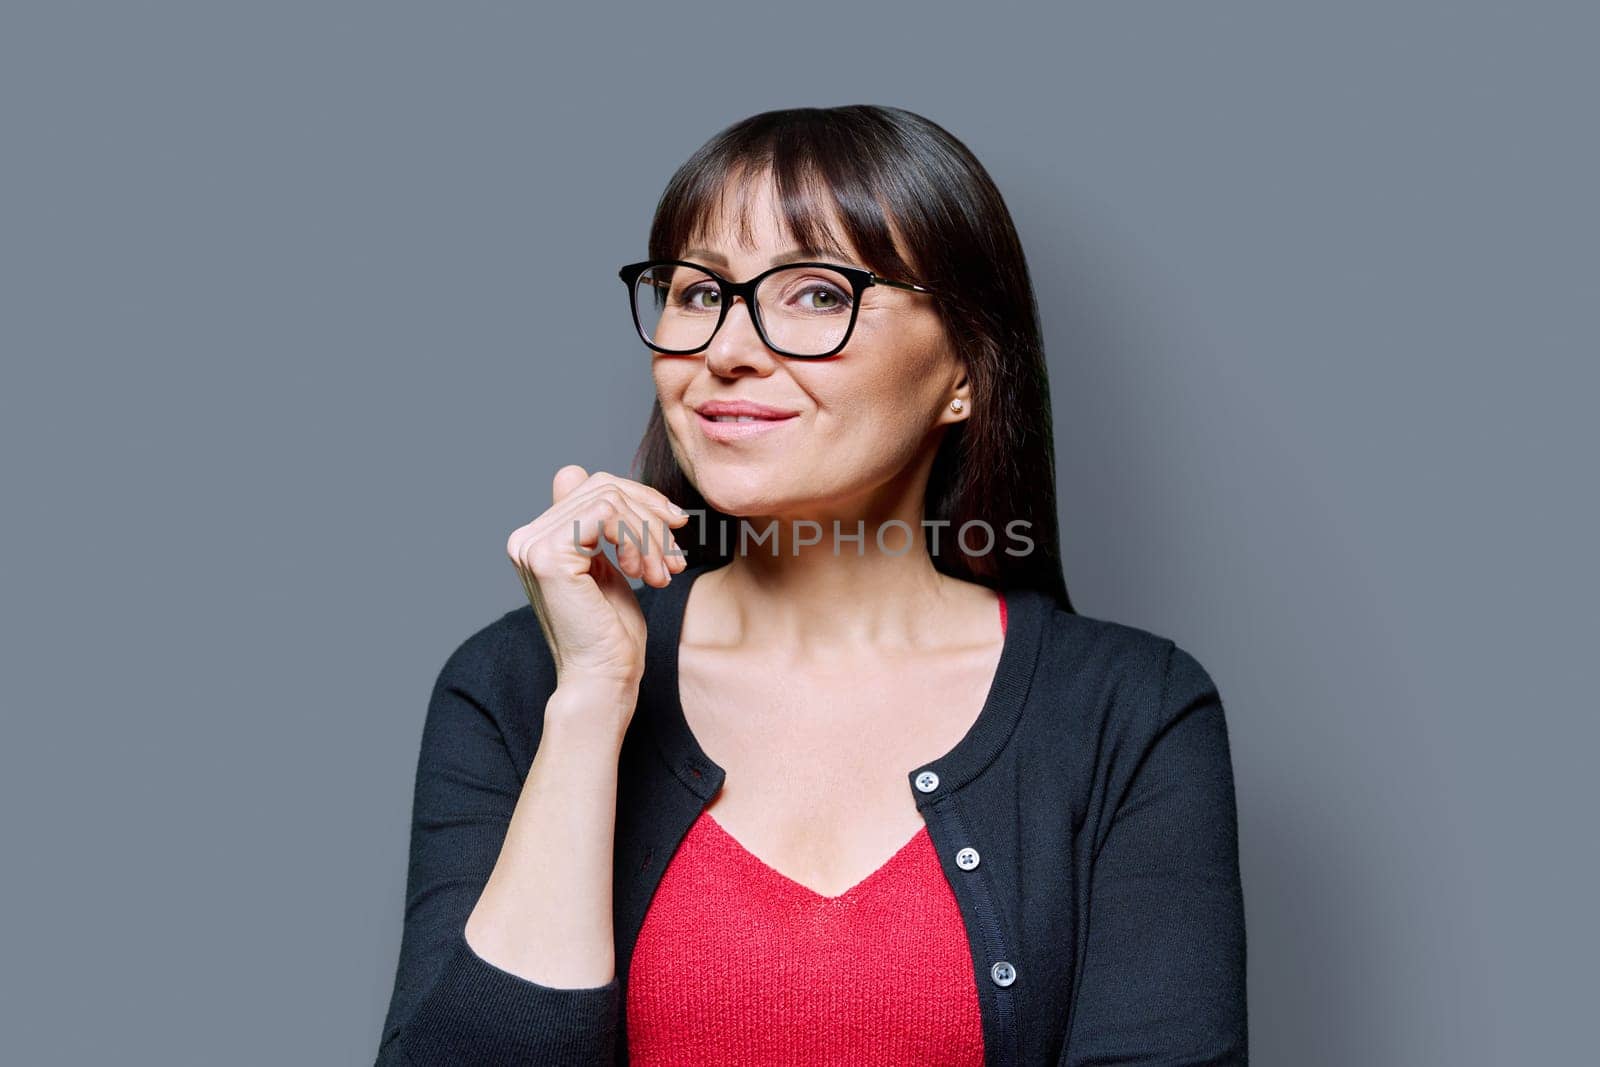 Headshot portrait of smiling with teeth mature woman on grey studio background. Successful elegant beautiful happy middle-aged female looking at camera. Beauty, health, lifestyle, 40s people